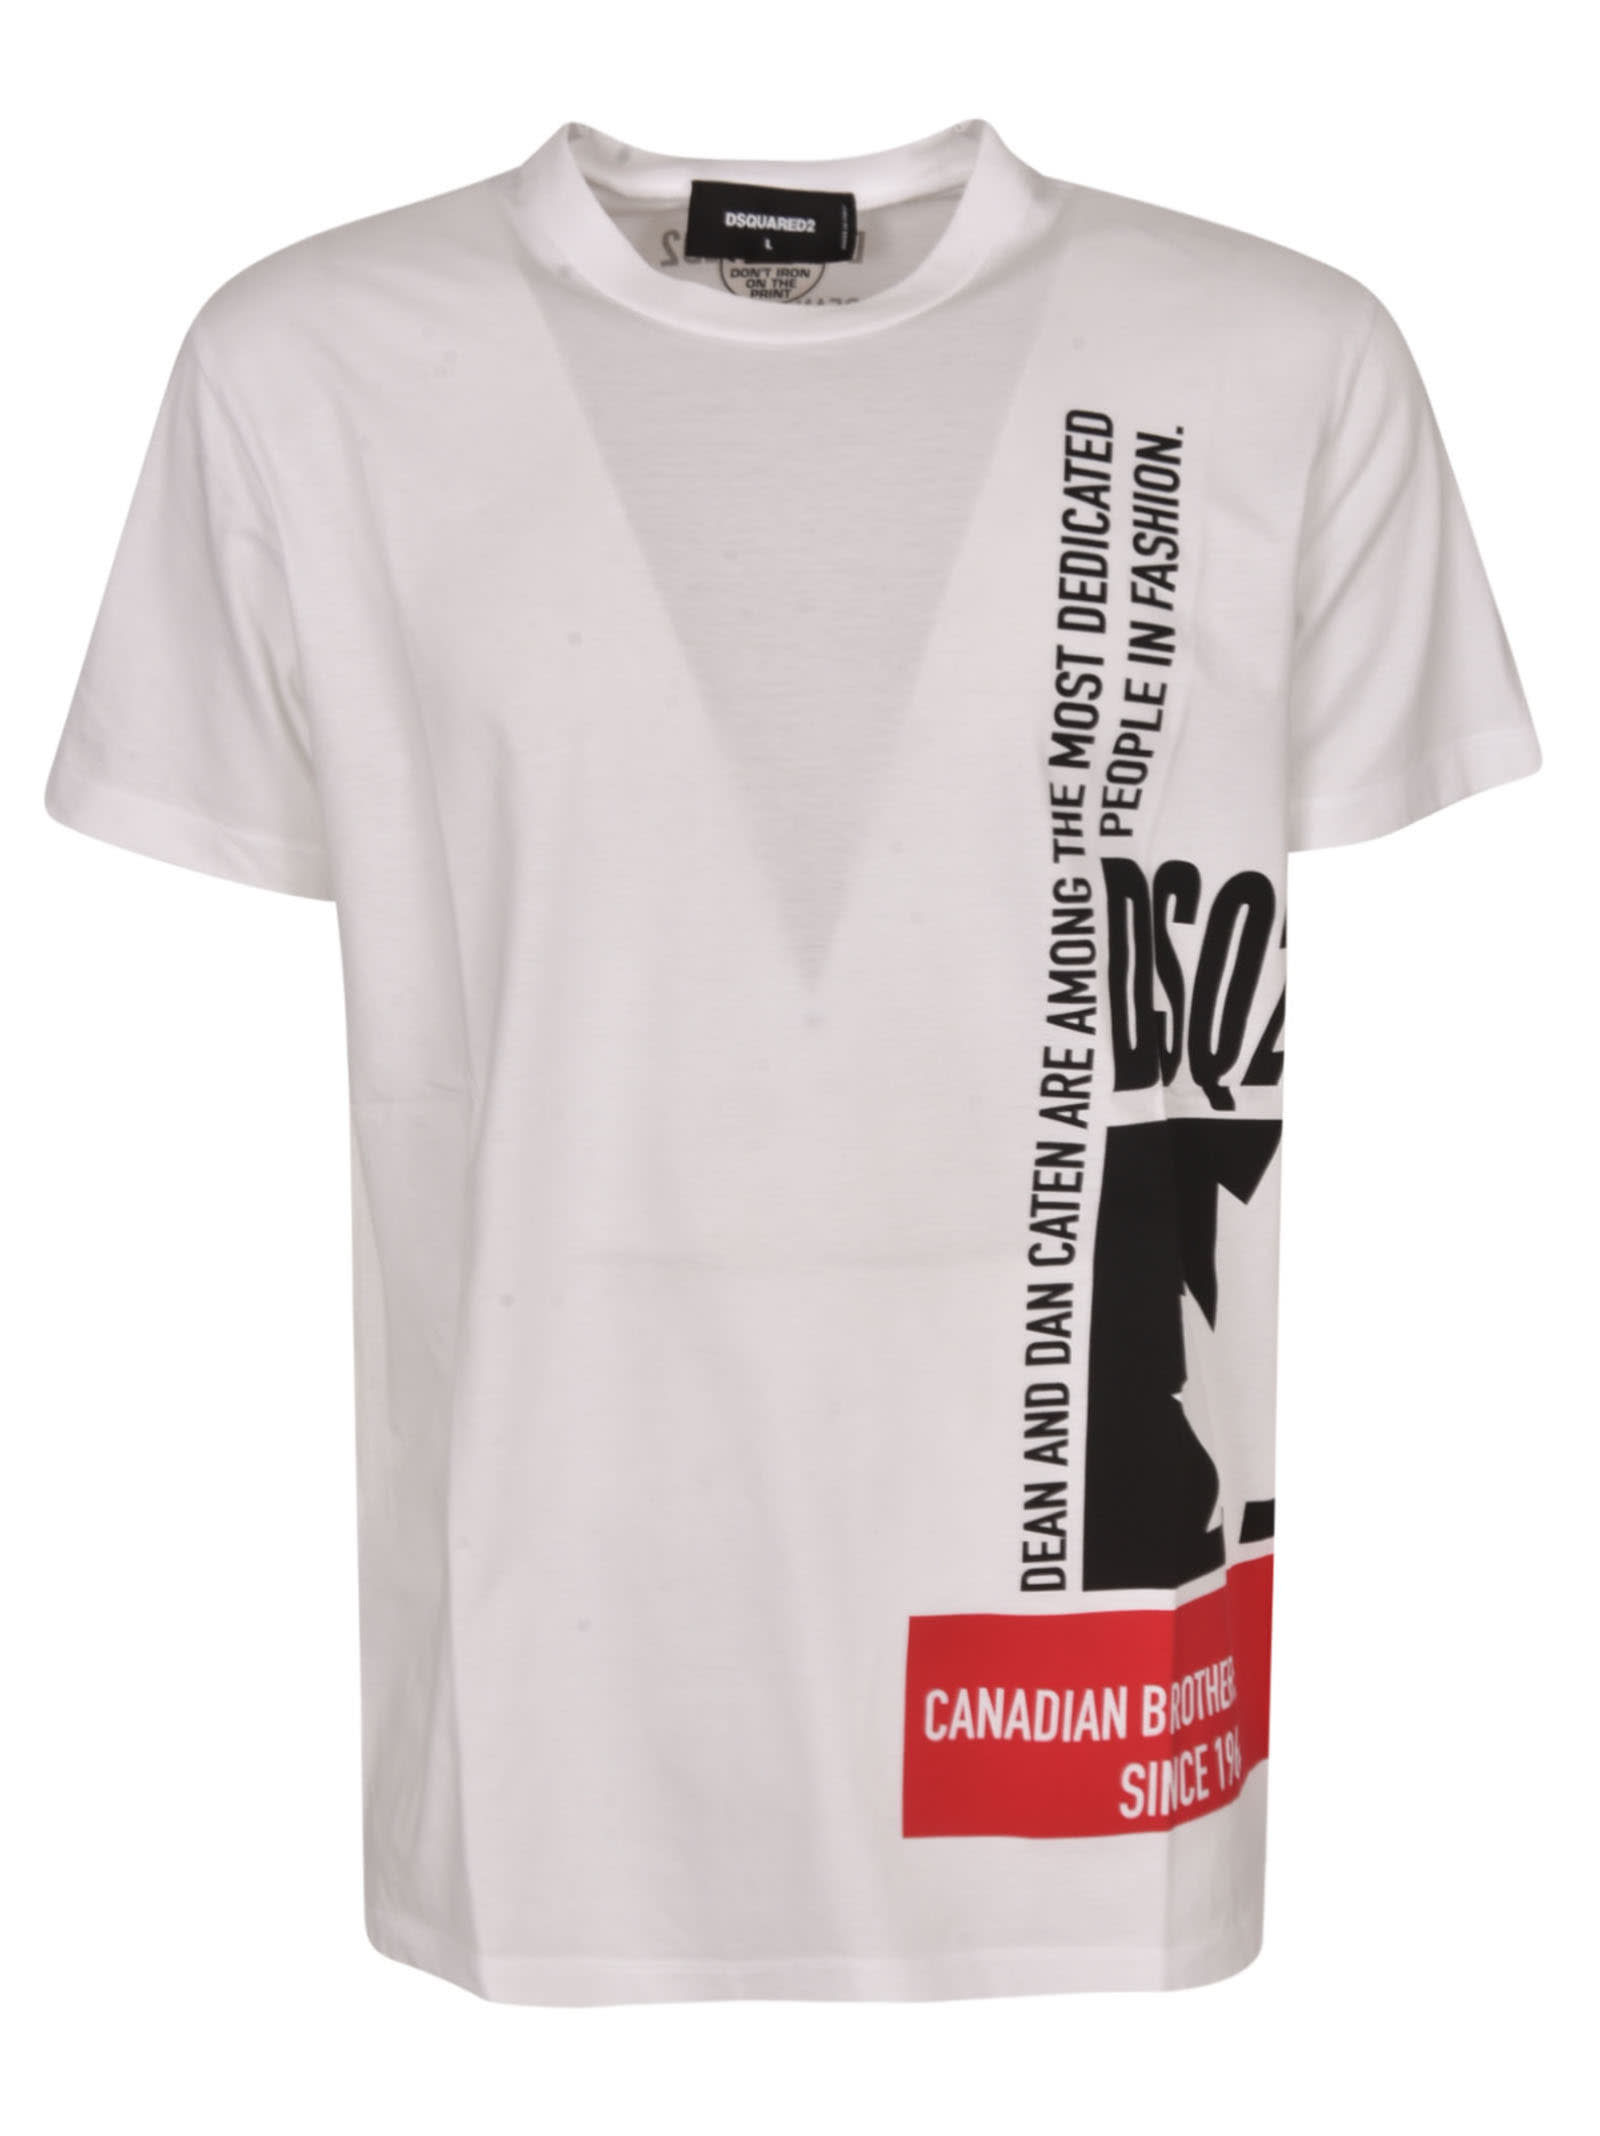 Dsquared2 Canadian Brother T-Shirt